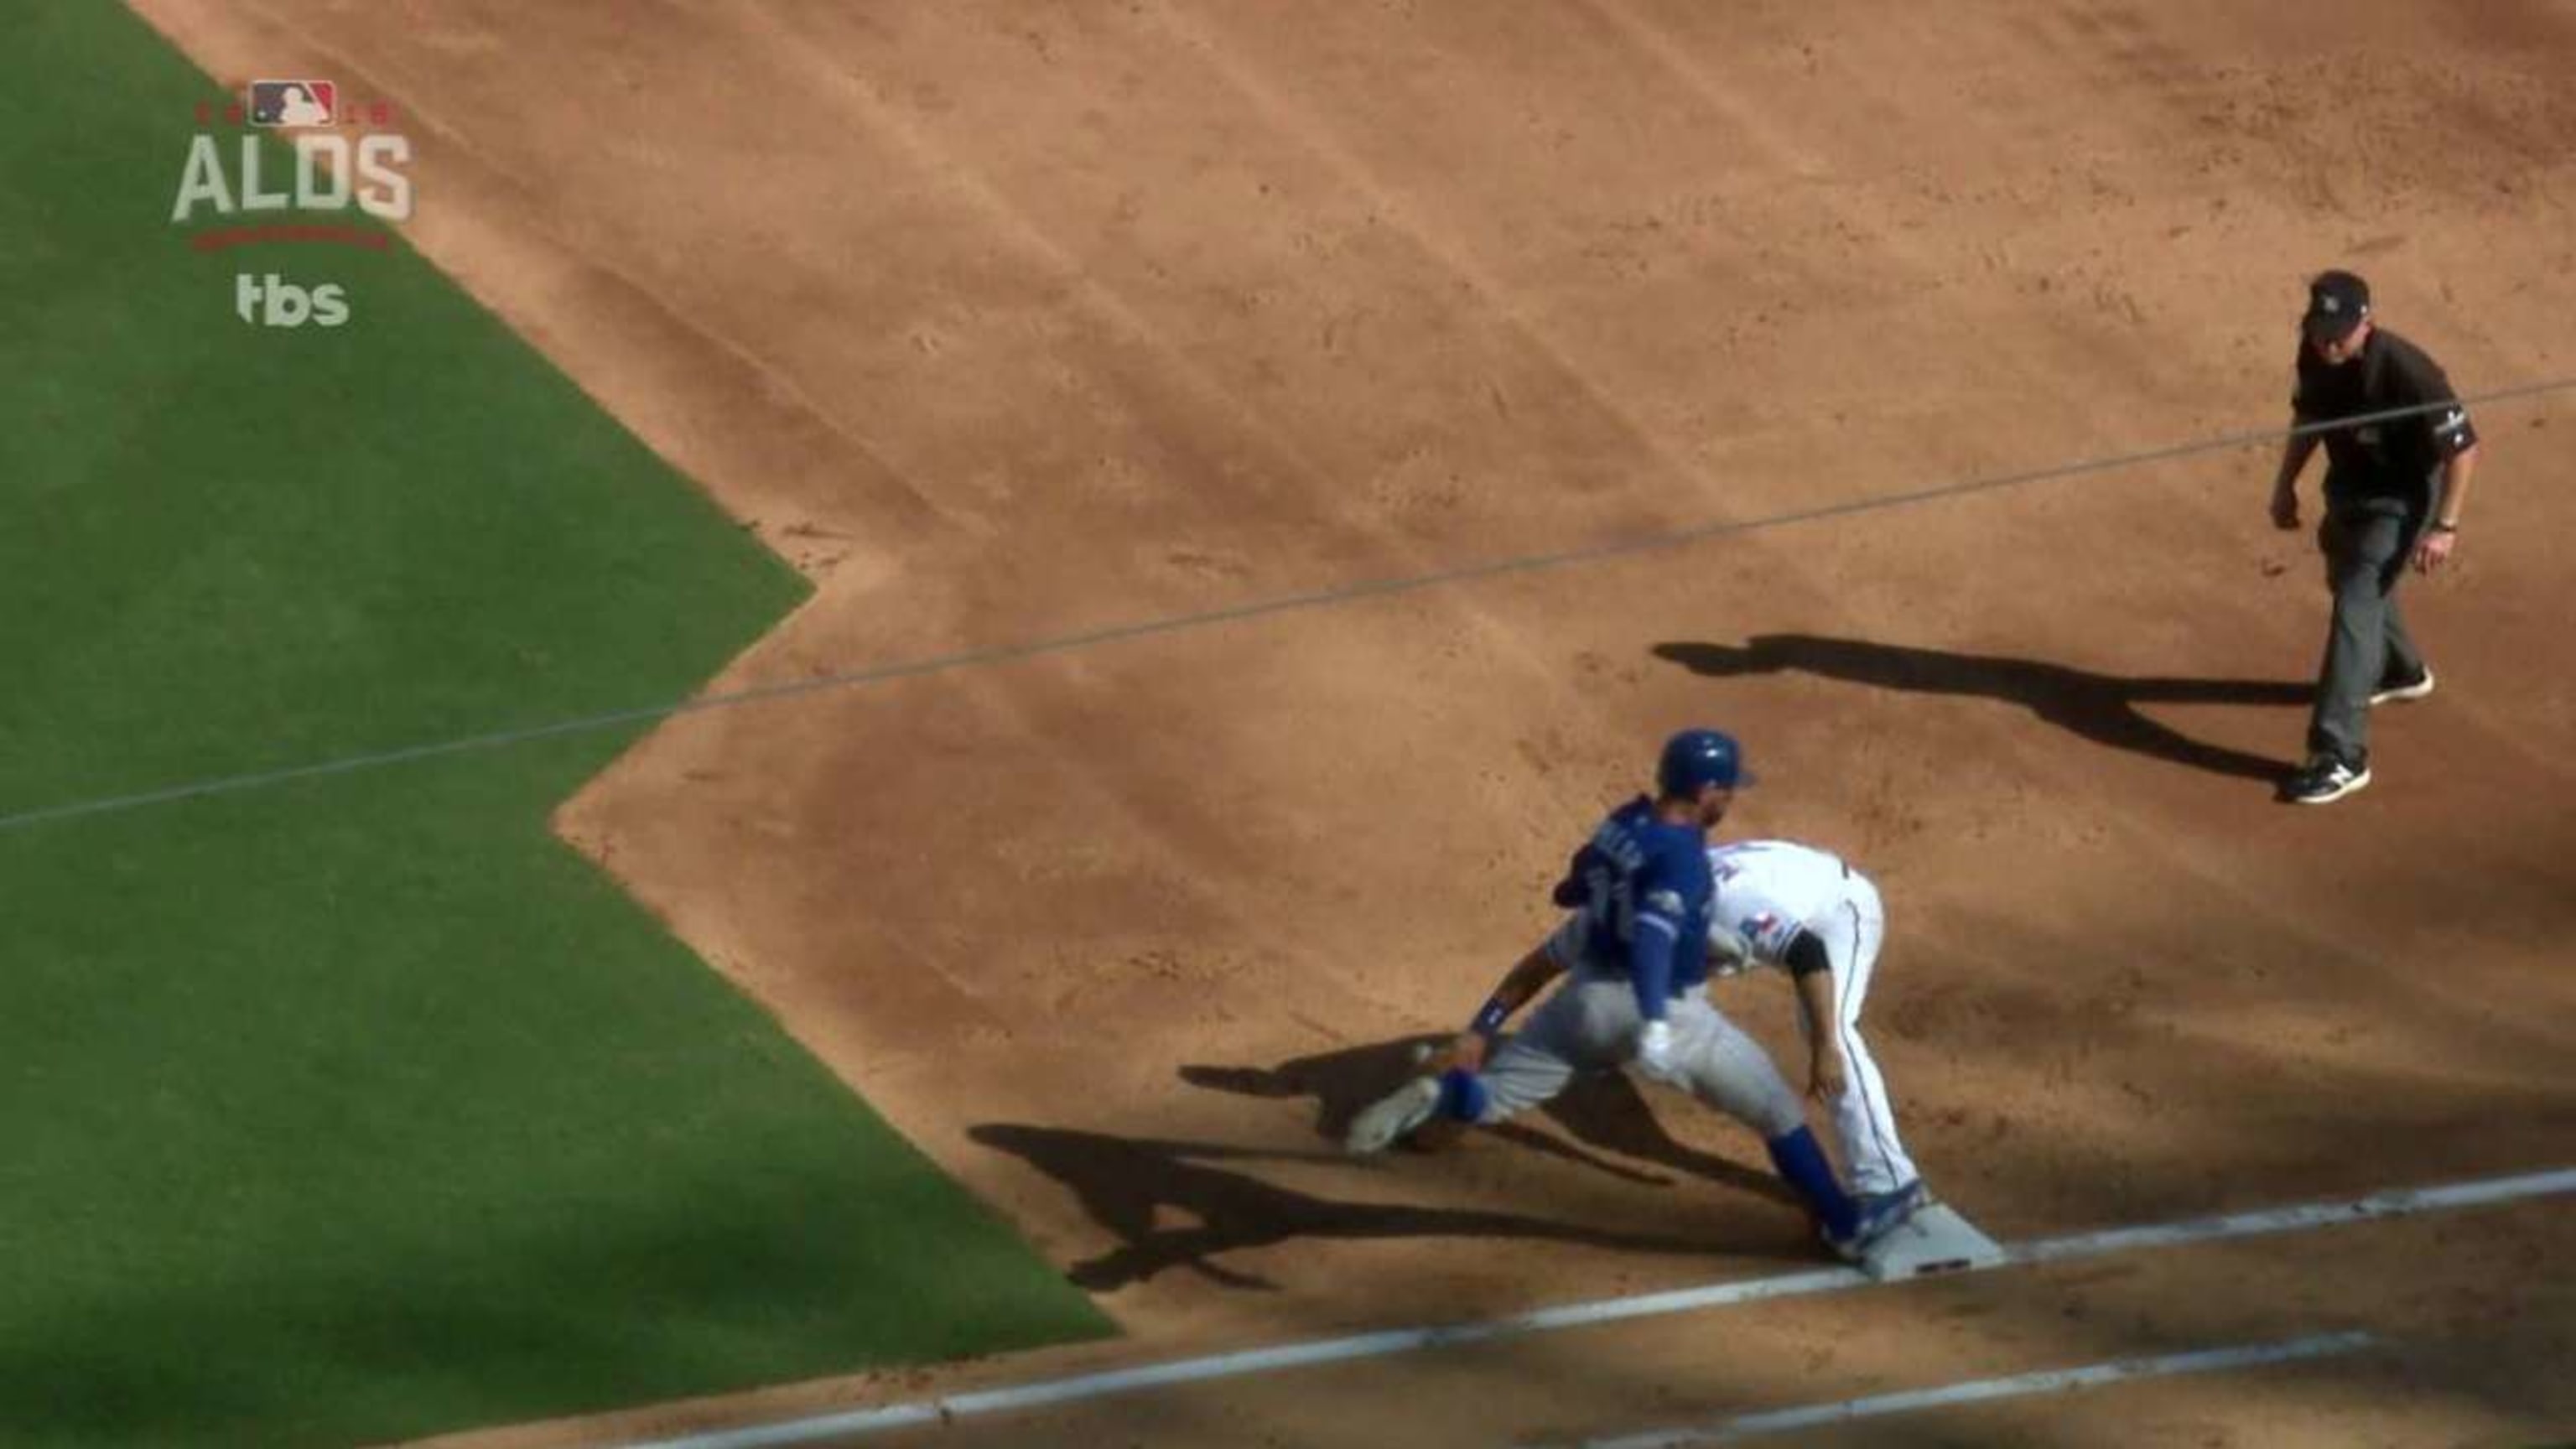 Elvis Andrus unveiled a Derek Jeter-esque jump throw in Game 1 of the ALDS